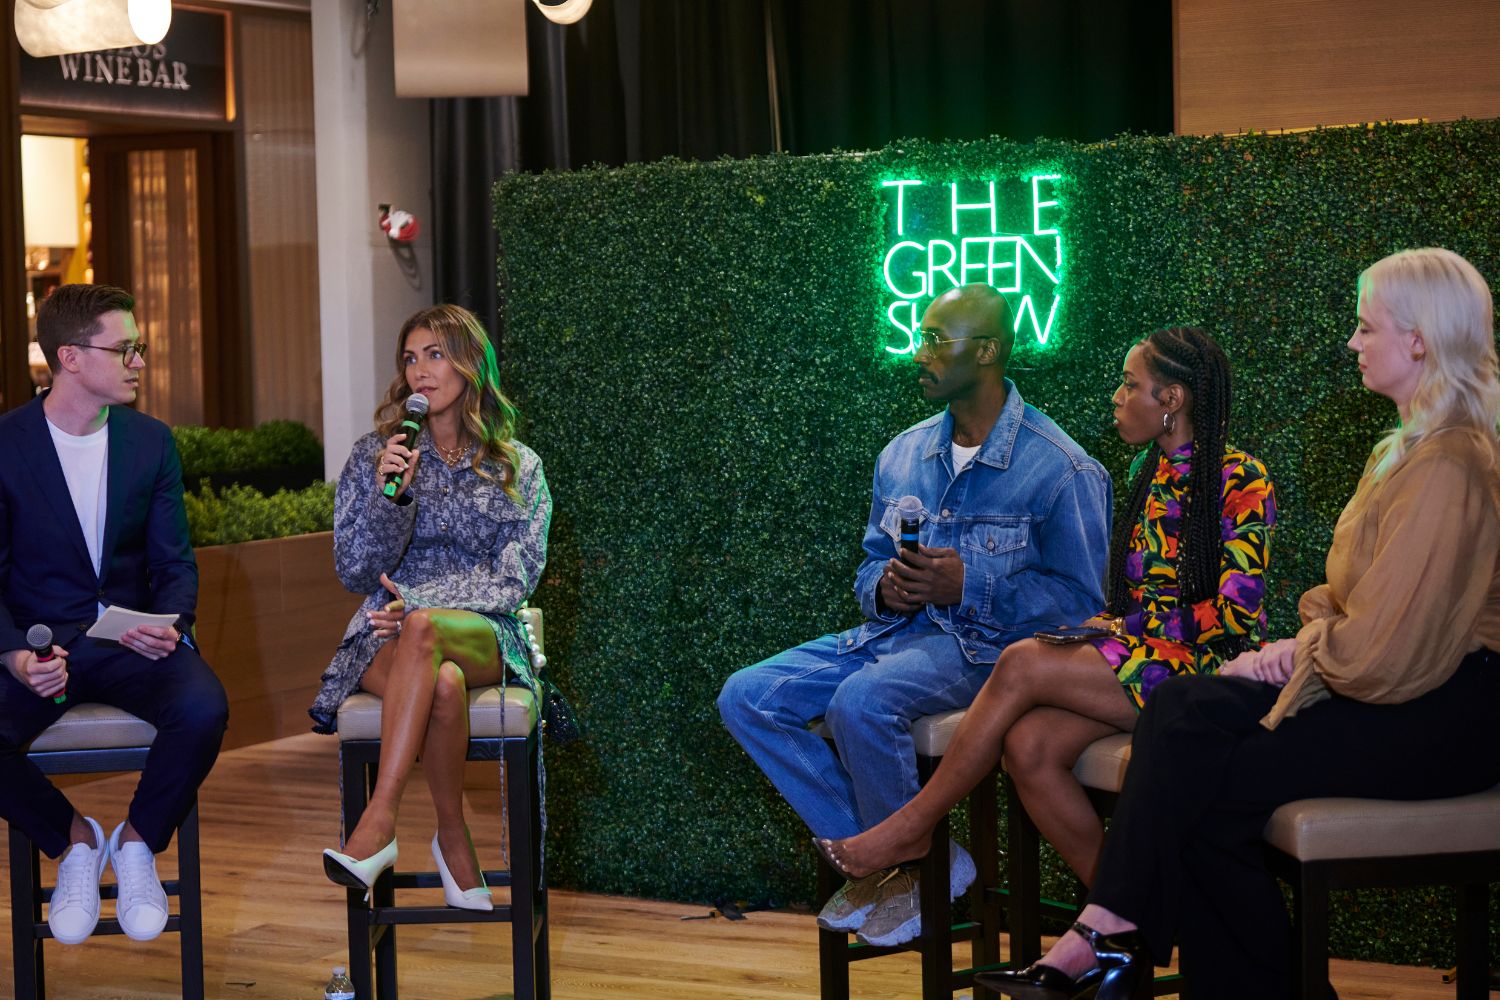 The Green Show │ An Unforgettable Evening of Sustainable Style and Innovation